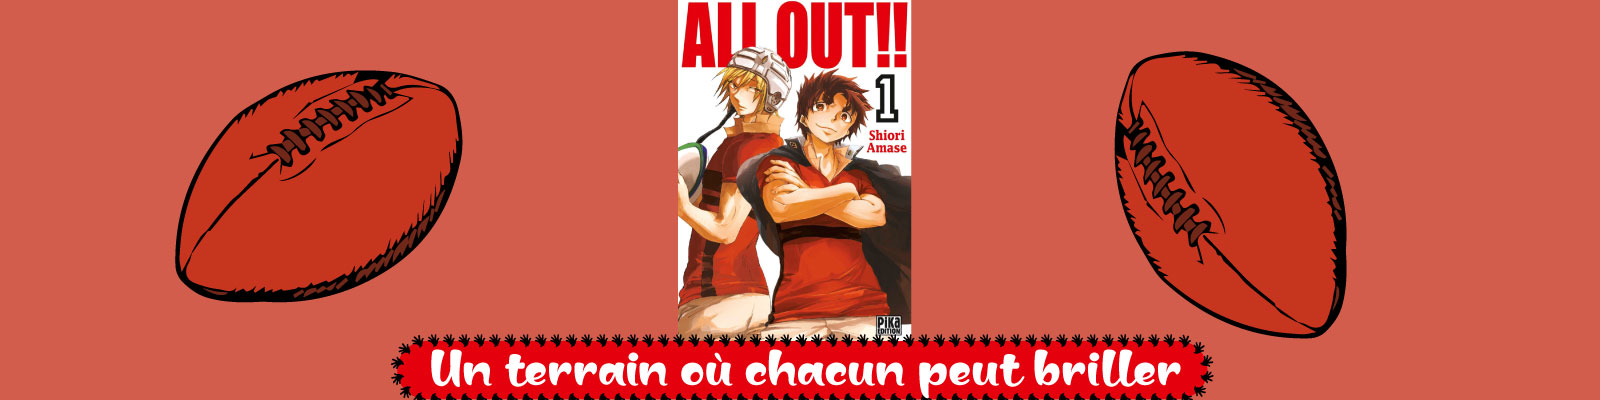 All Out!!-Vol.1-2